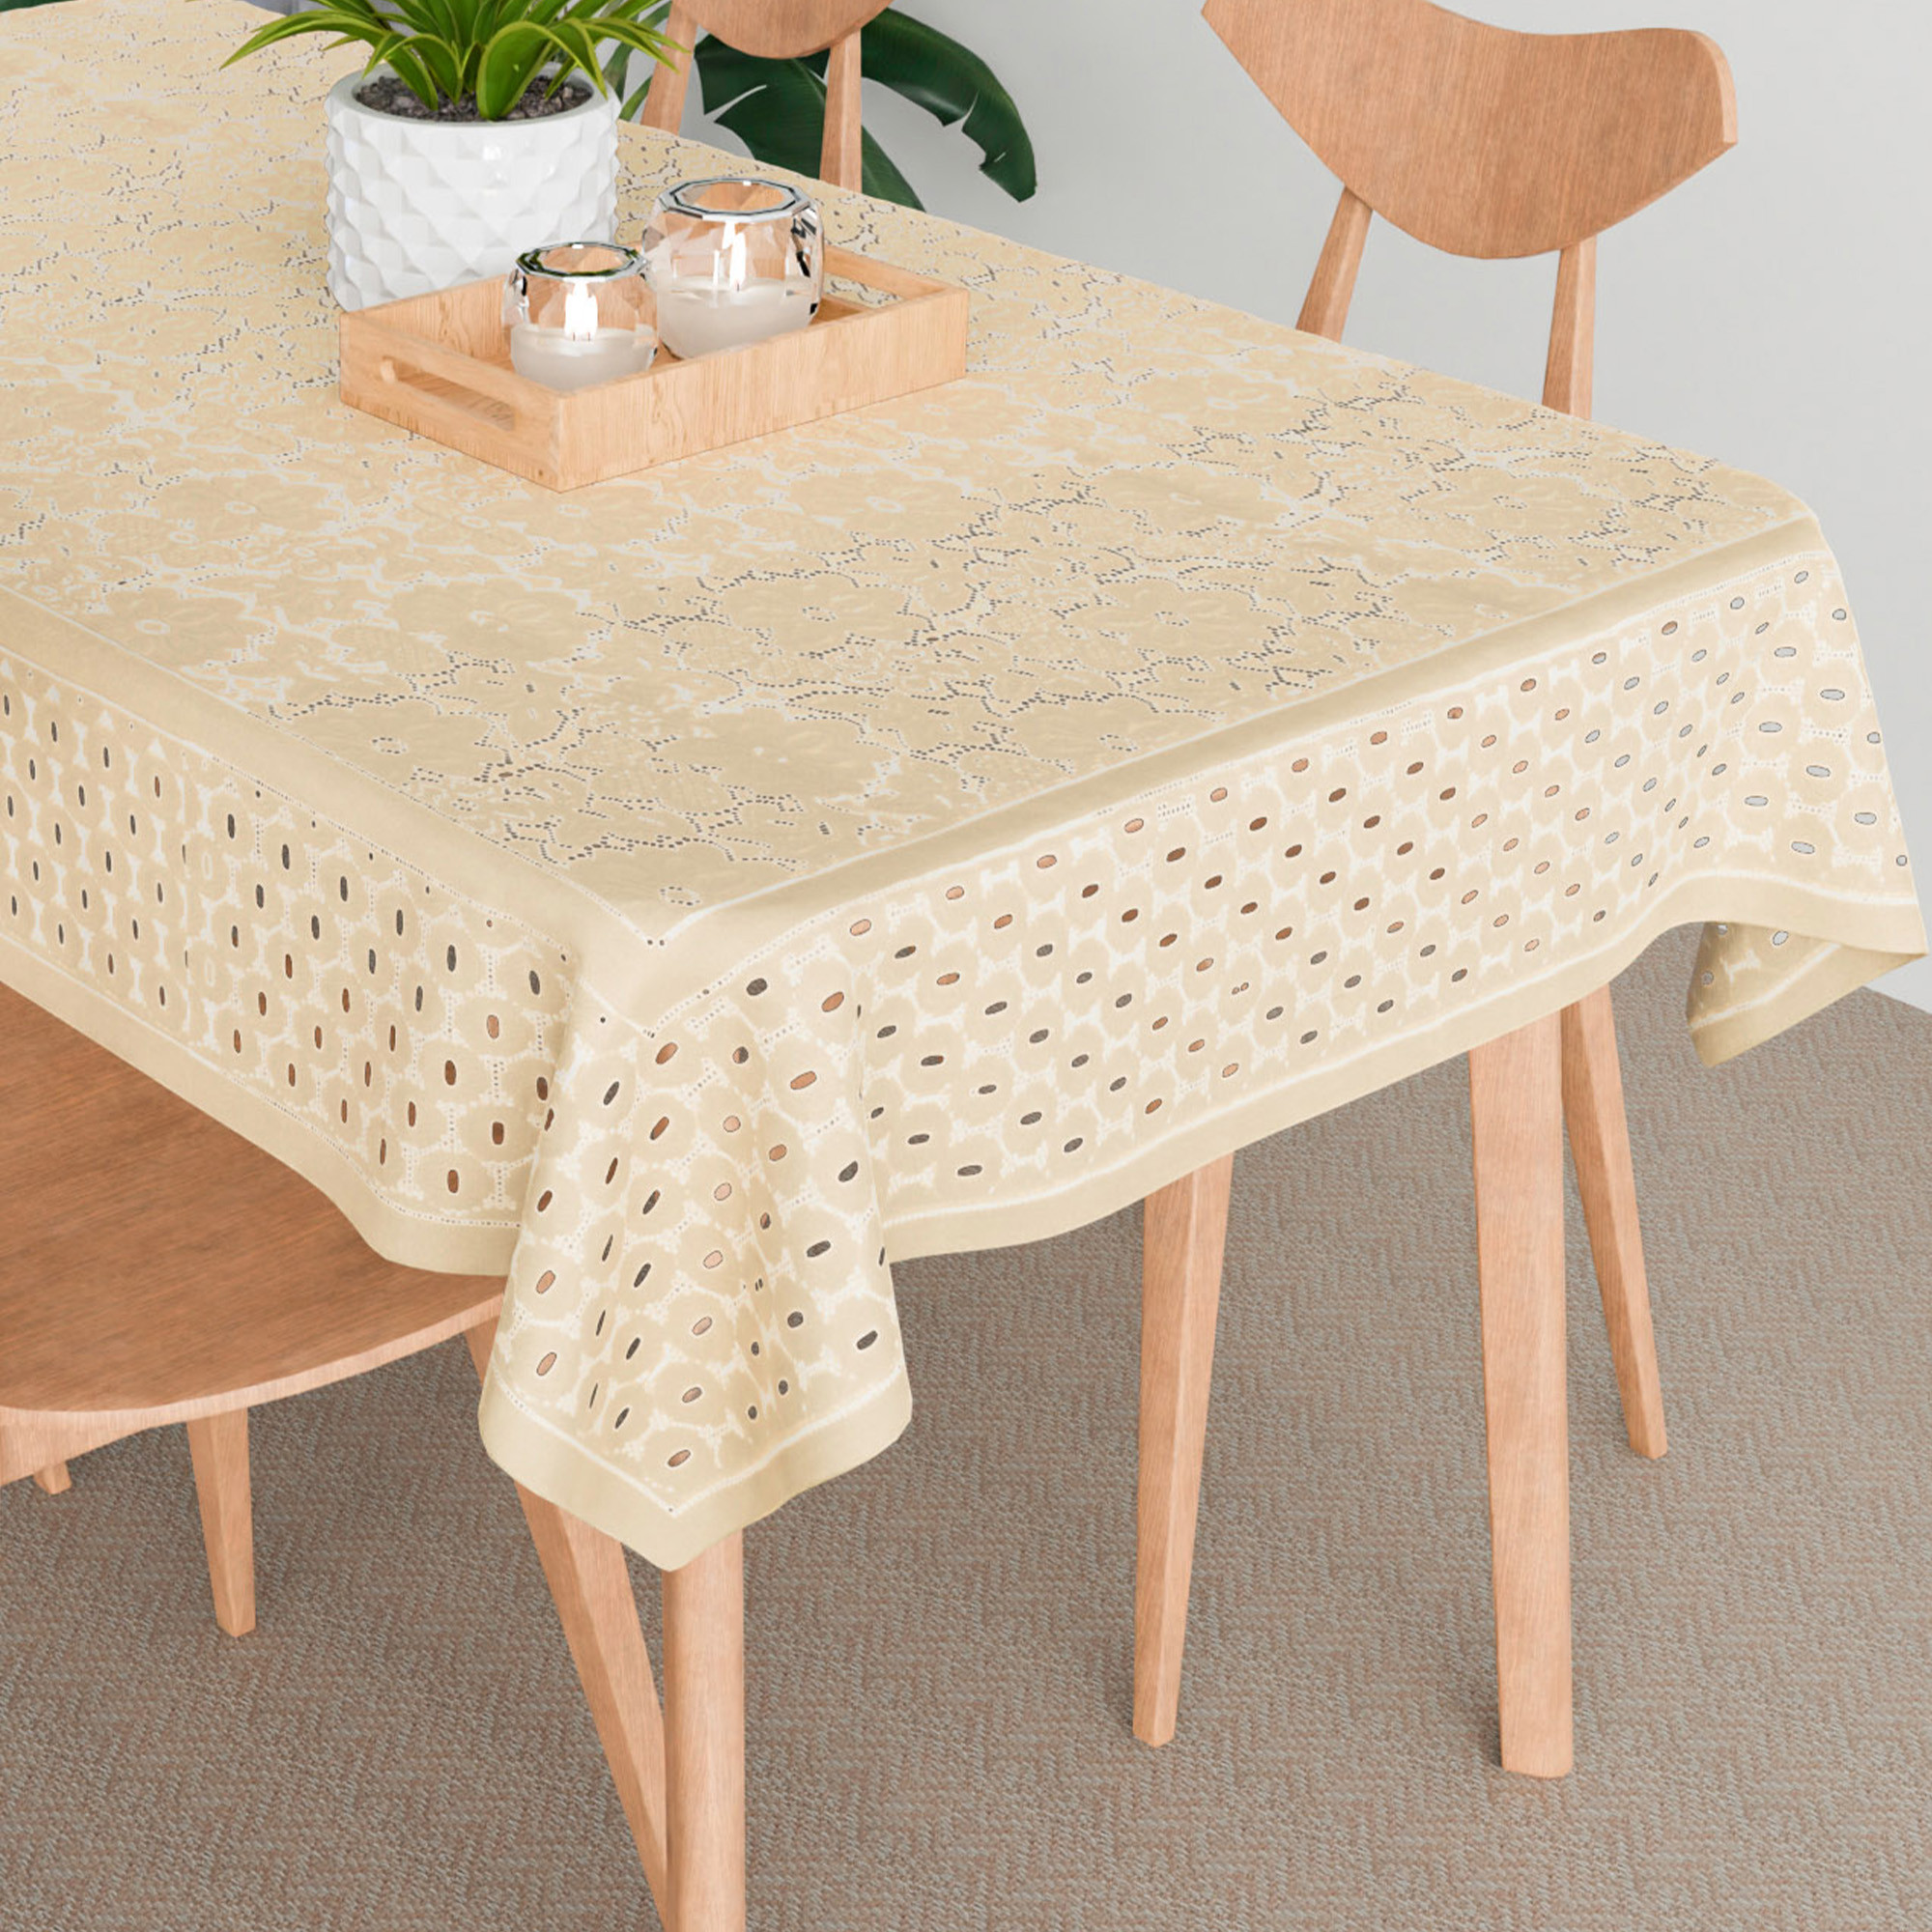 Kuber Industries Table Cover | Net Tabletop Cover | Table Linen Cover | Table Cloth Cover | Table Cover for Kitchen | Table Cover for Hall Décor | Self Flower Valley-Design | 45x70 Inch | Cream